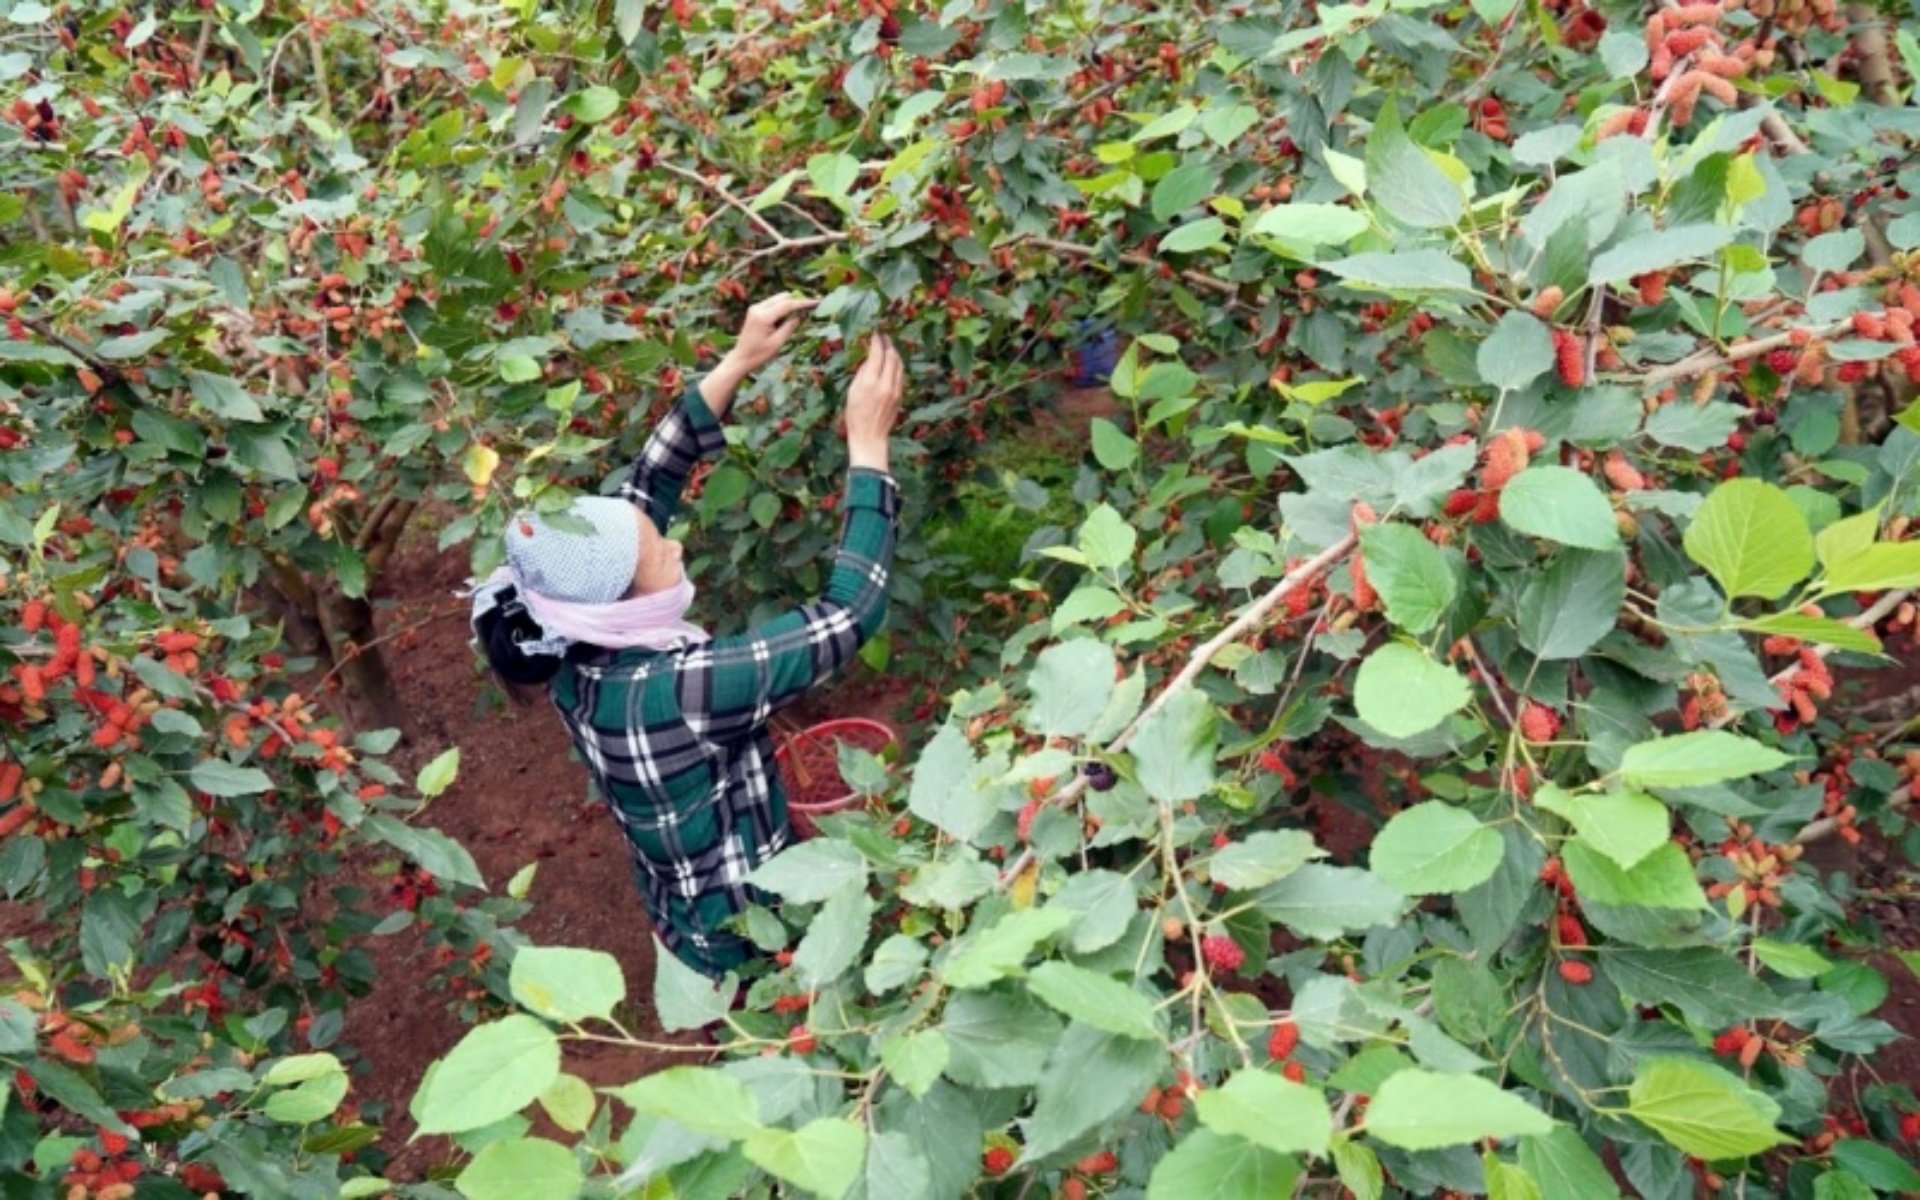 Mulberry fields in Hanoi turn red when April comes